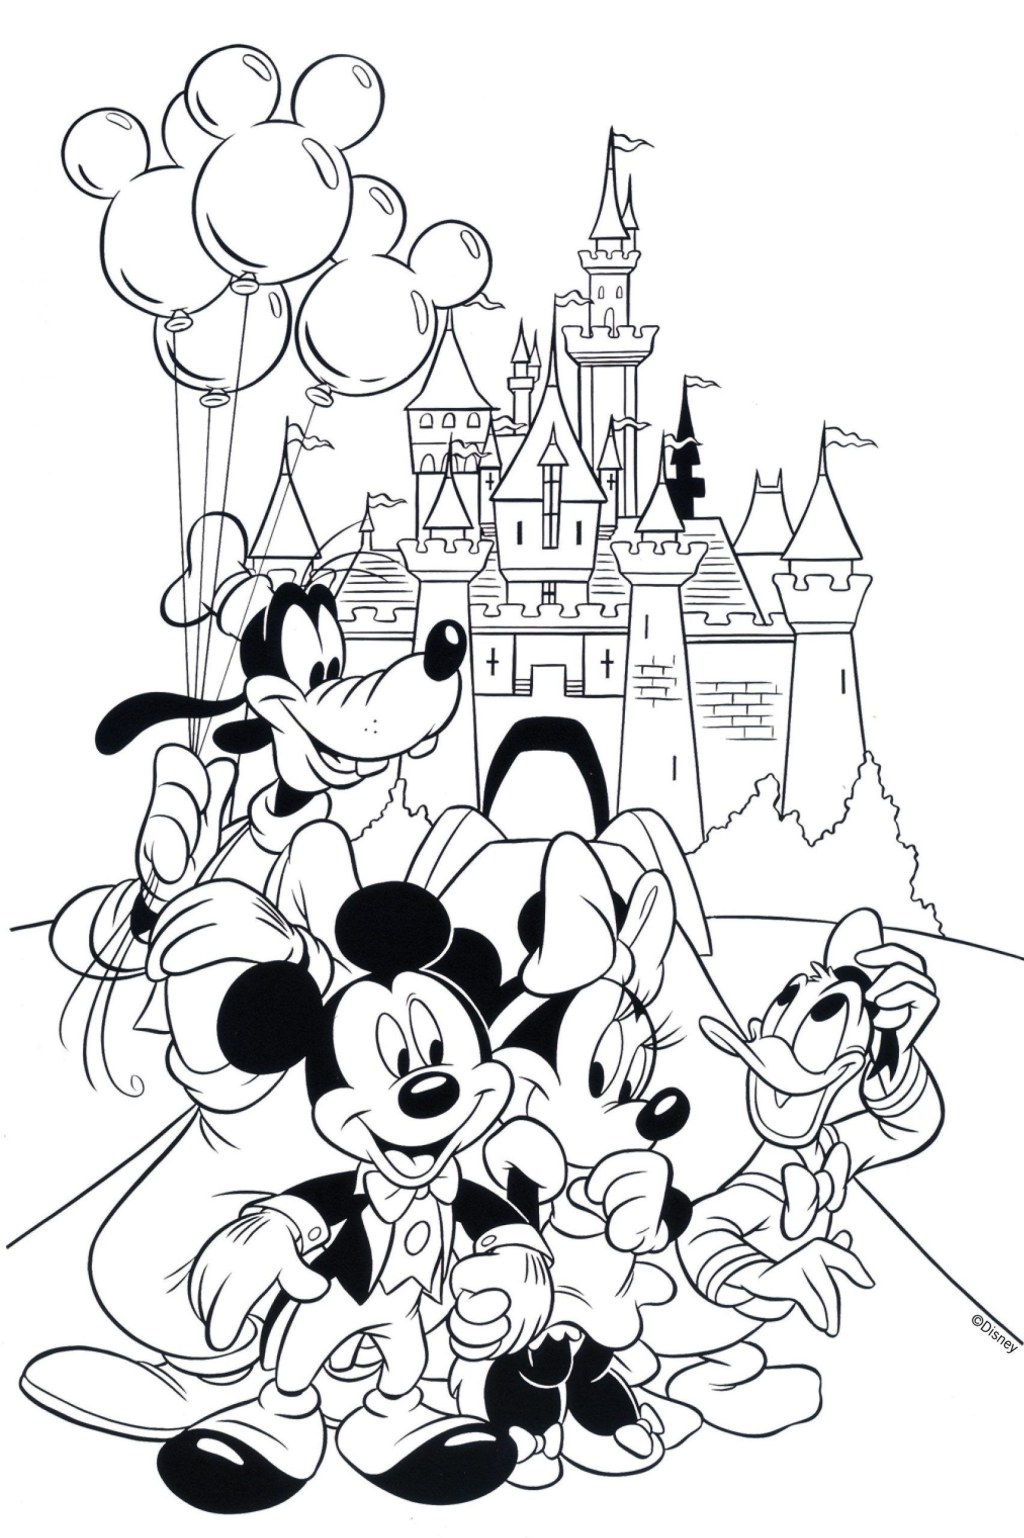 Picture of: disney worksheets pdf – Google Search  Disney coloring pages